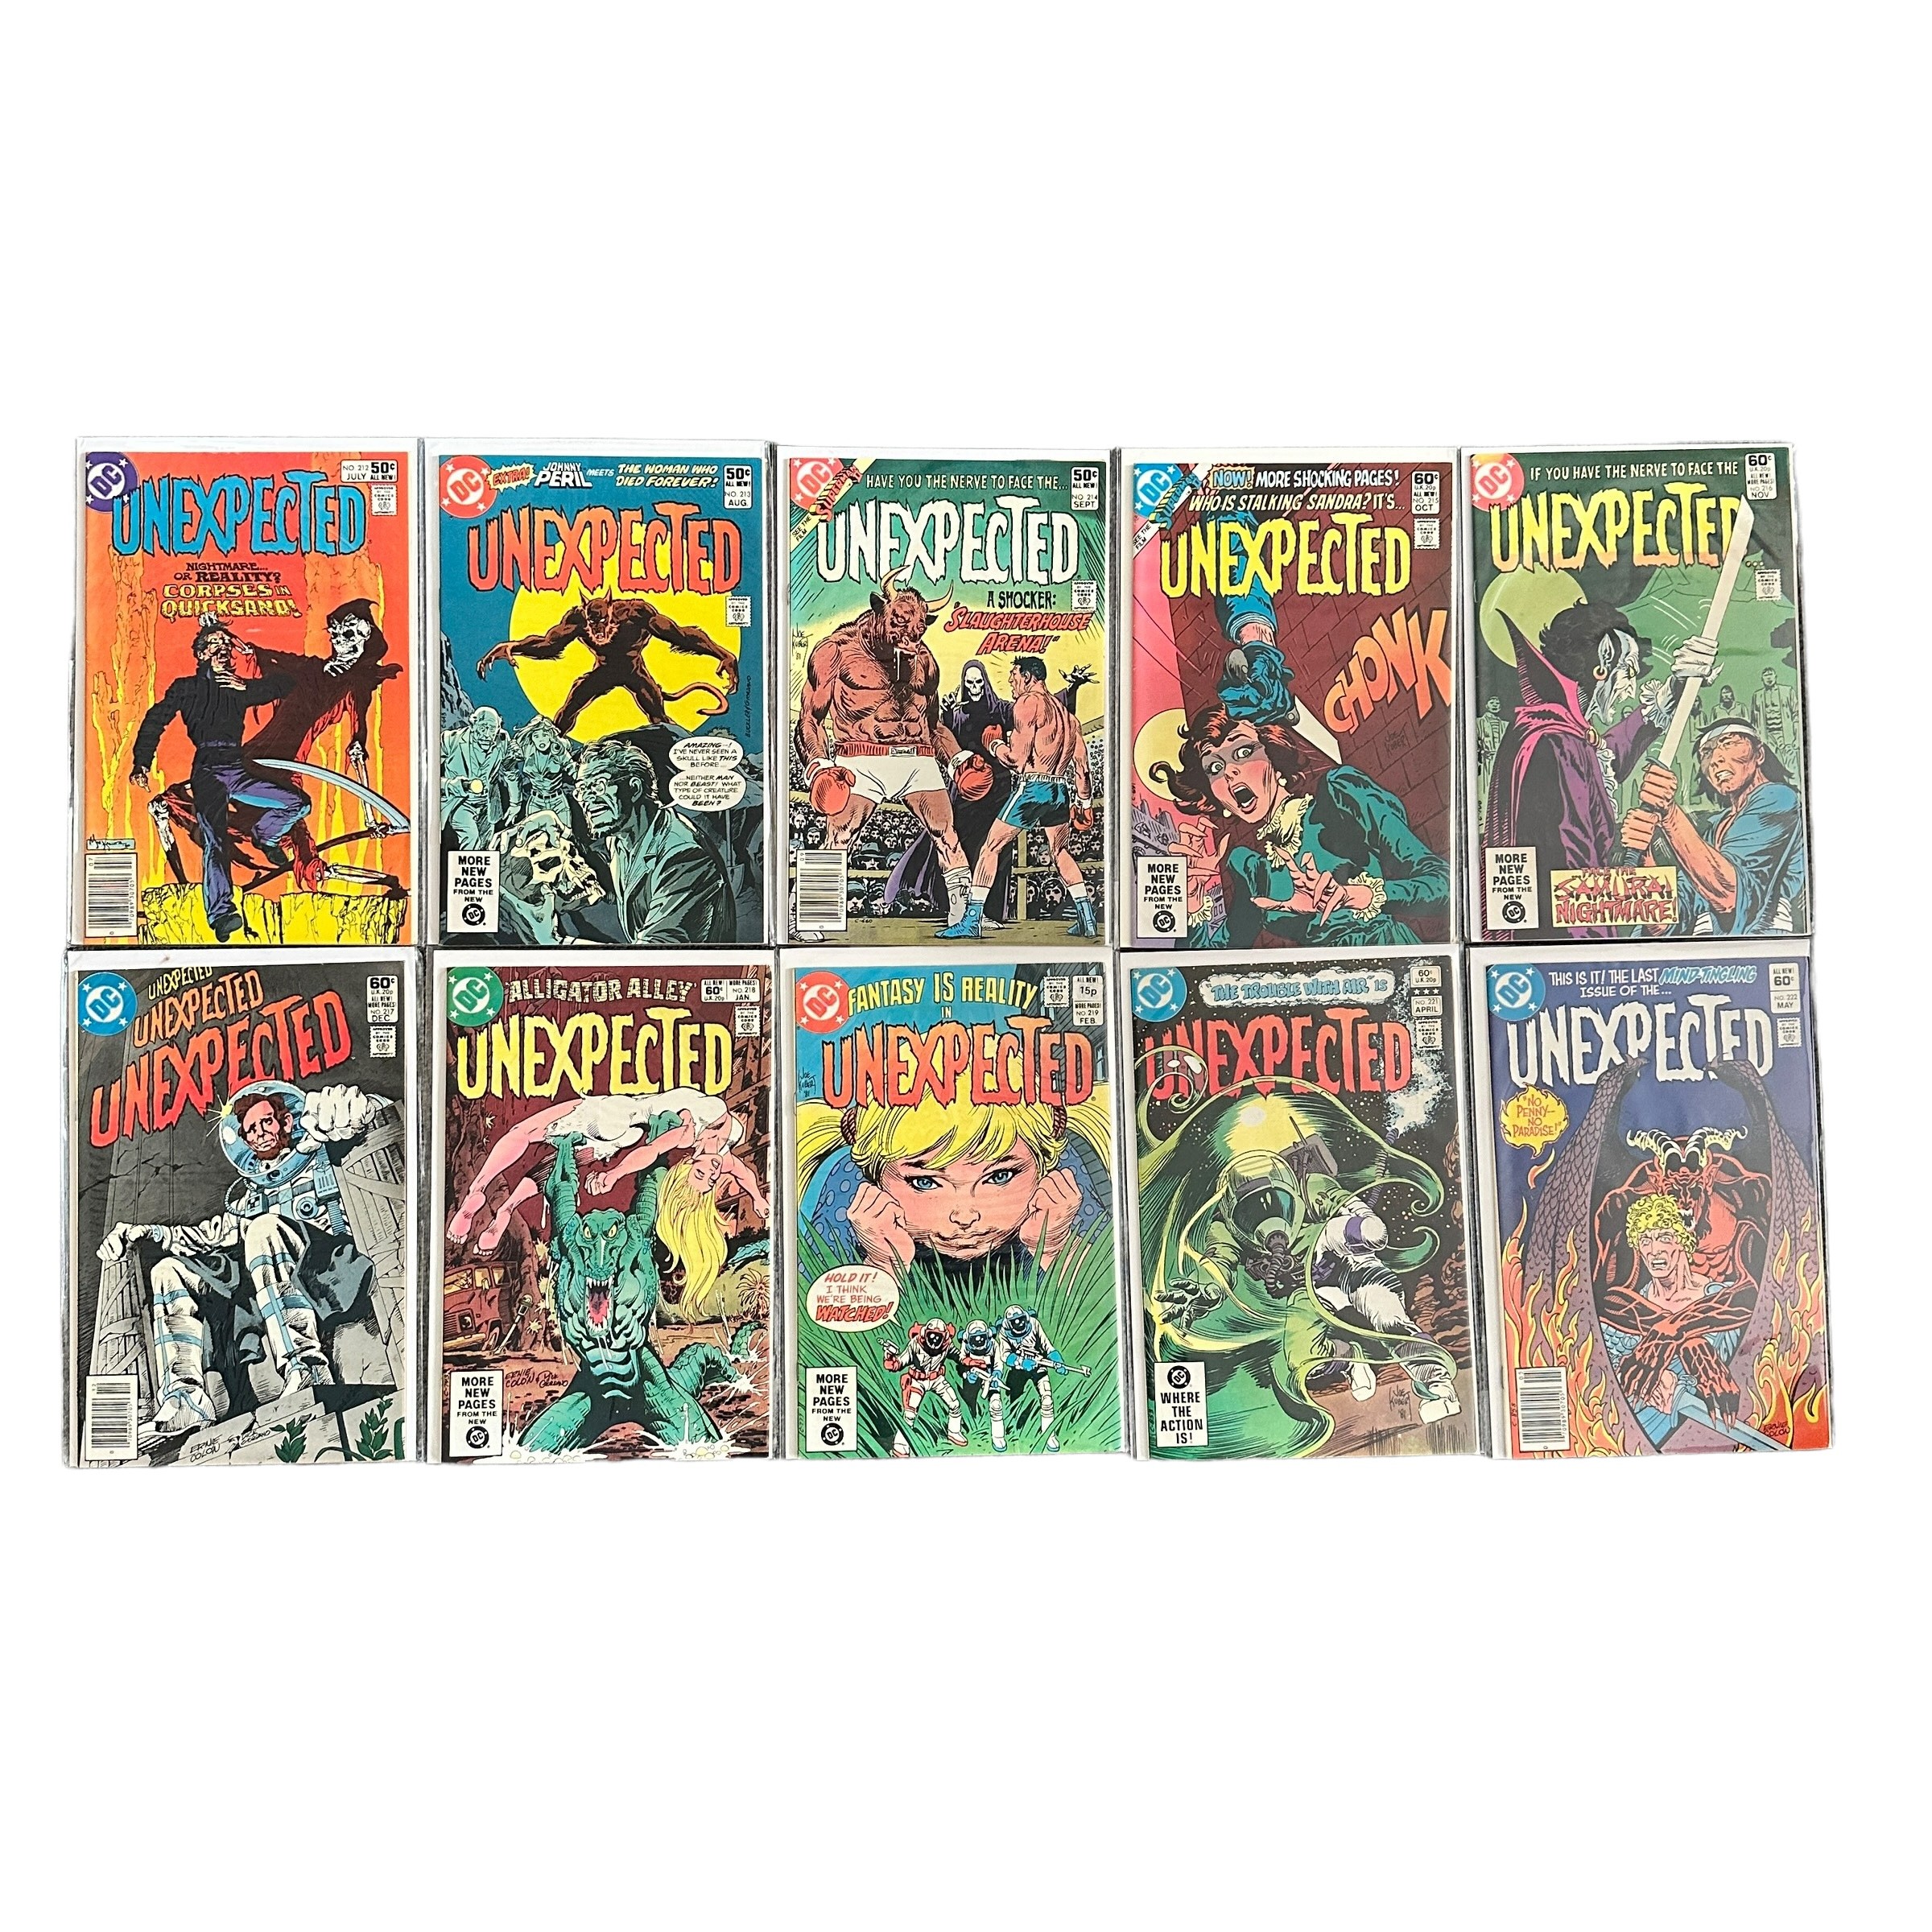 DC Comics Unexpected 1980s Nos 199-201, 203-210, 212-219, 221-222: All 21 comics bagged & boarded, - Image 2 of 2